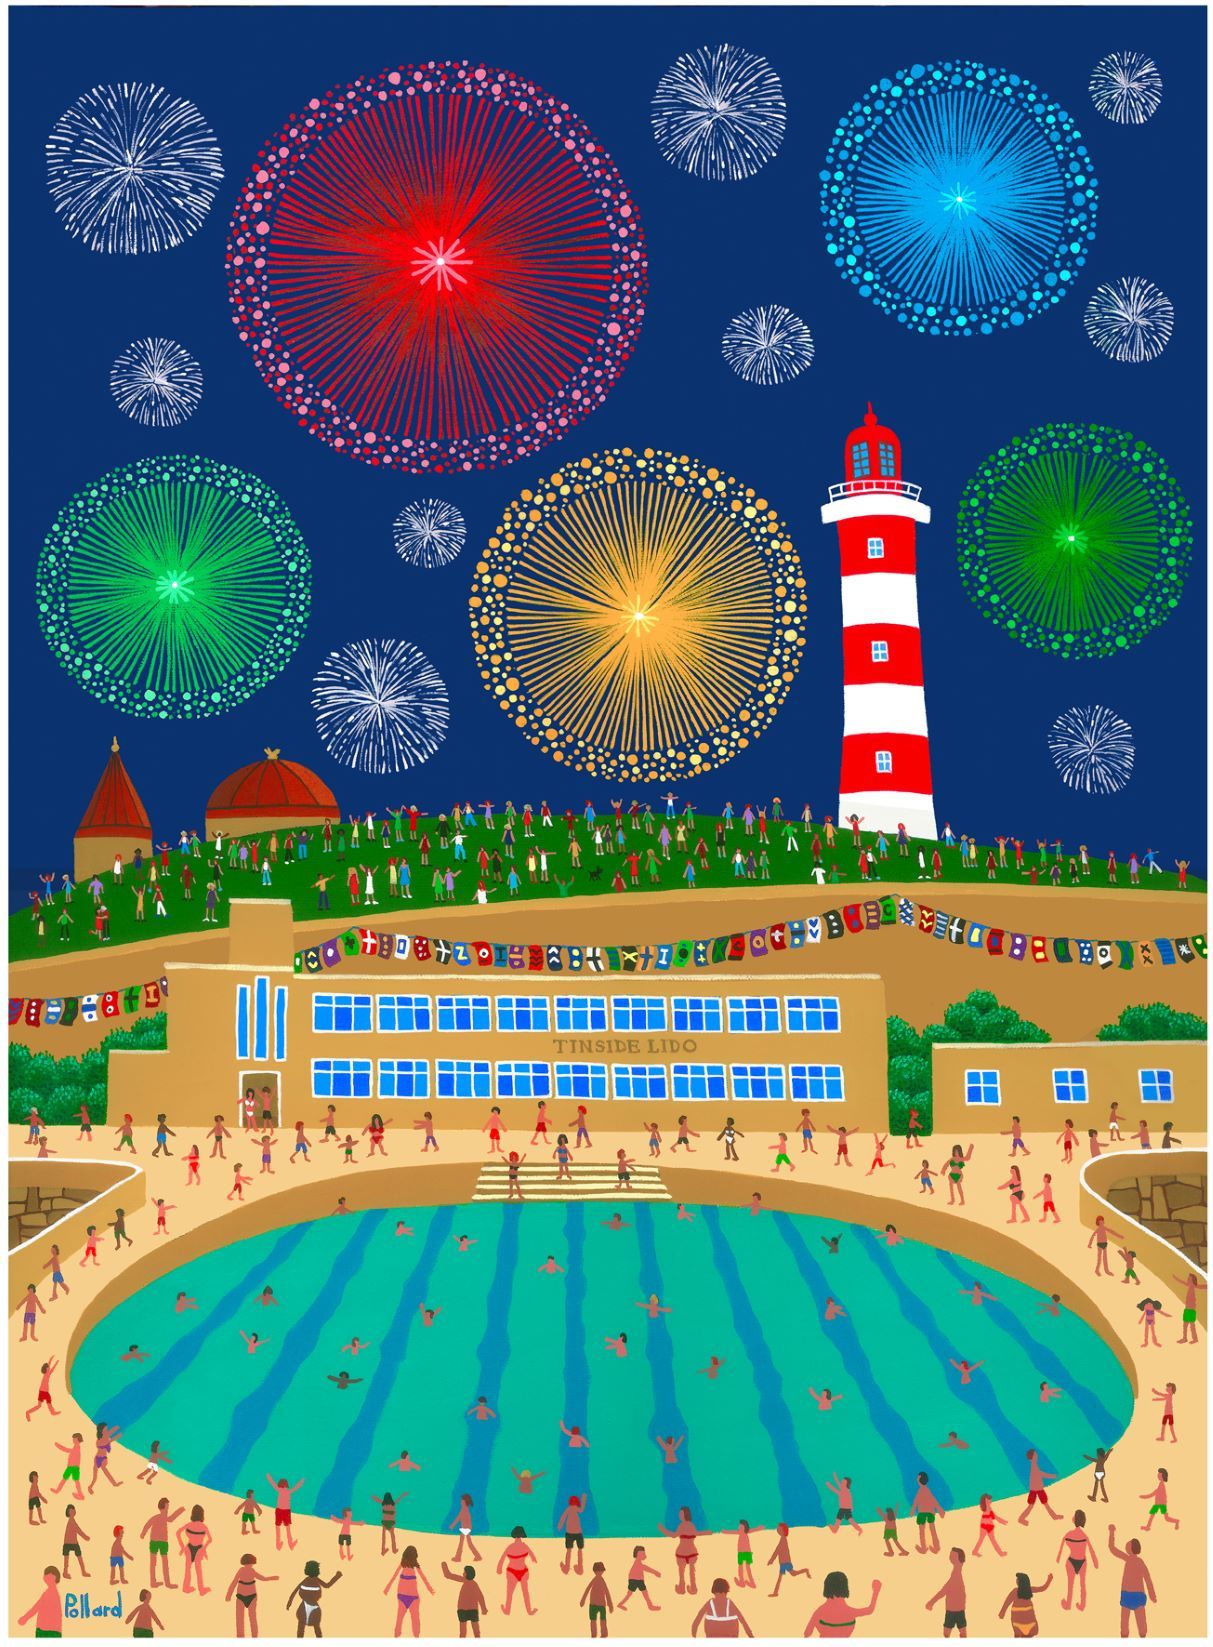 Fireworks and Lido by Brian Pollard